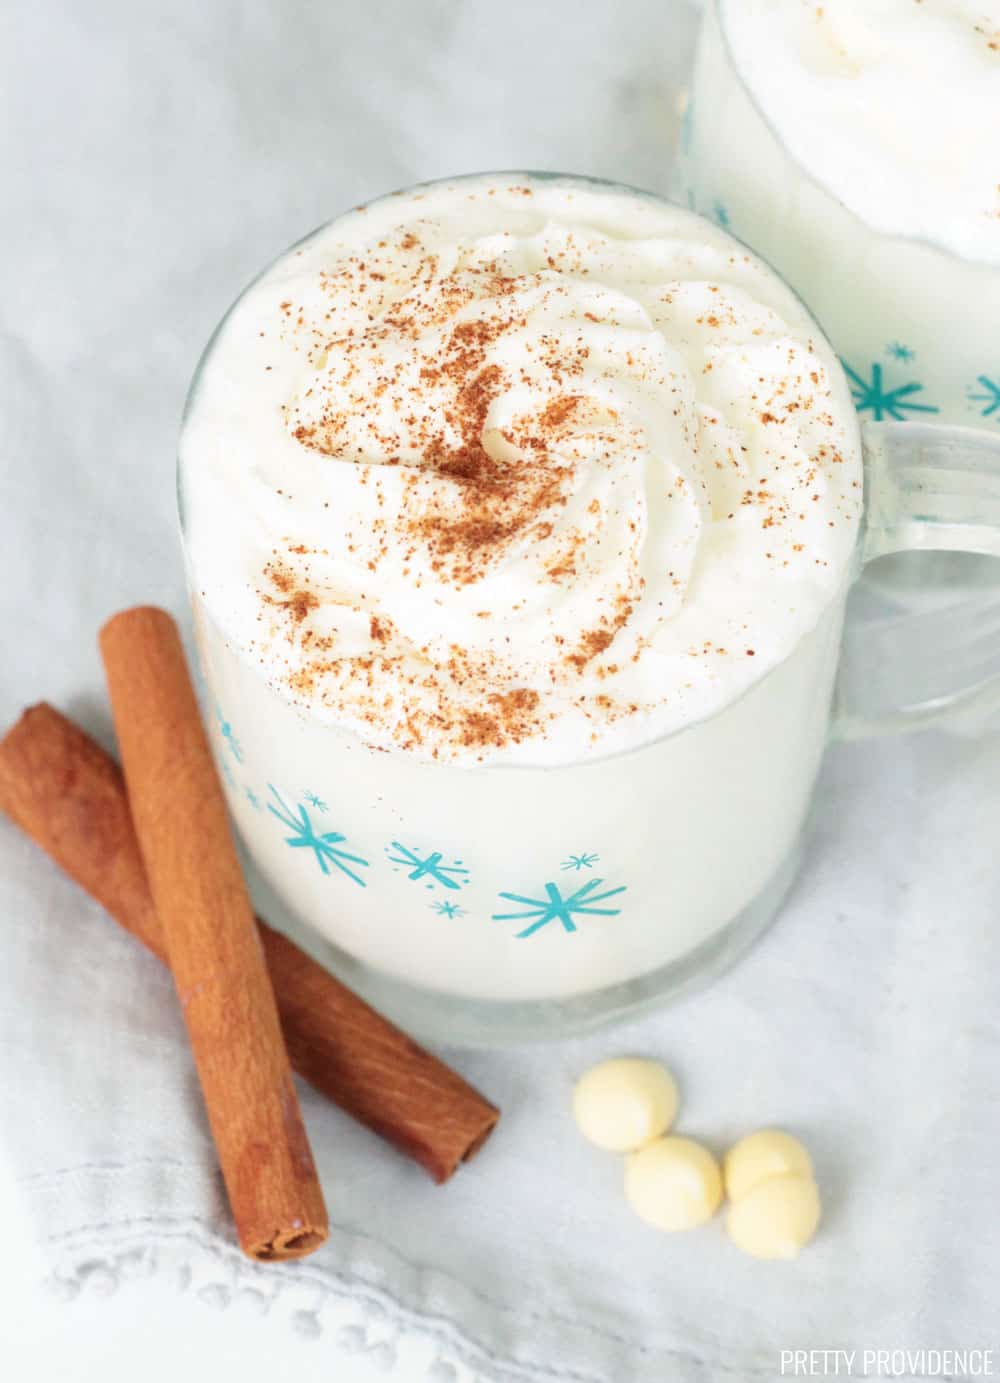 Mug of white hot chocolate topped with whipped cream and dusted with cinnamon, cinnamon sticks and white chocolate chips on the side.